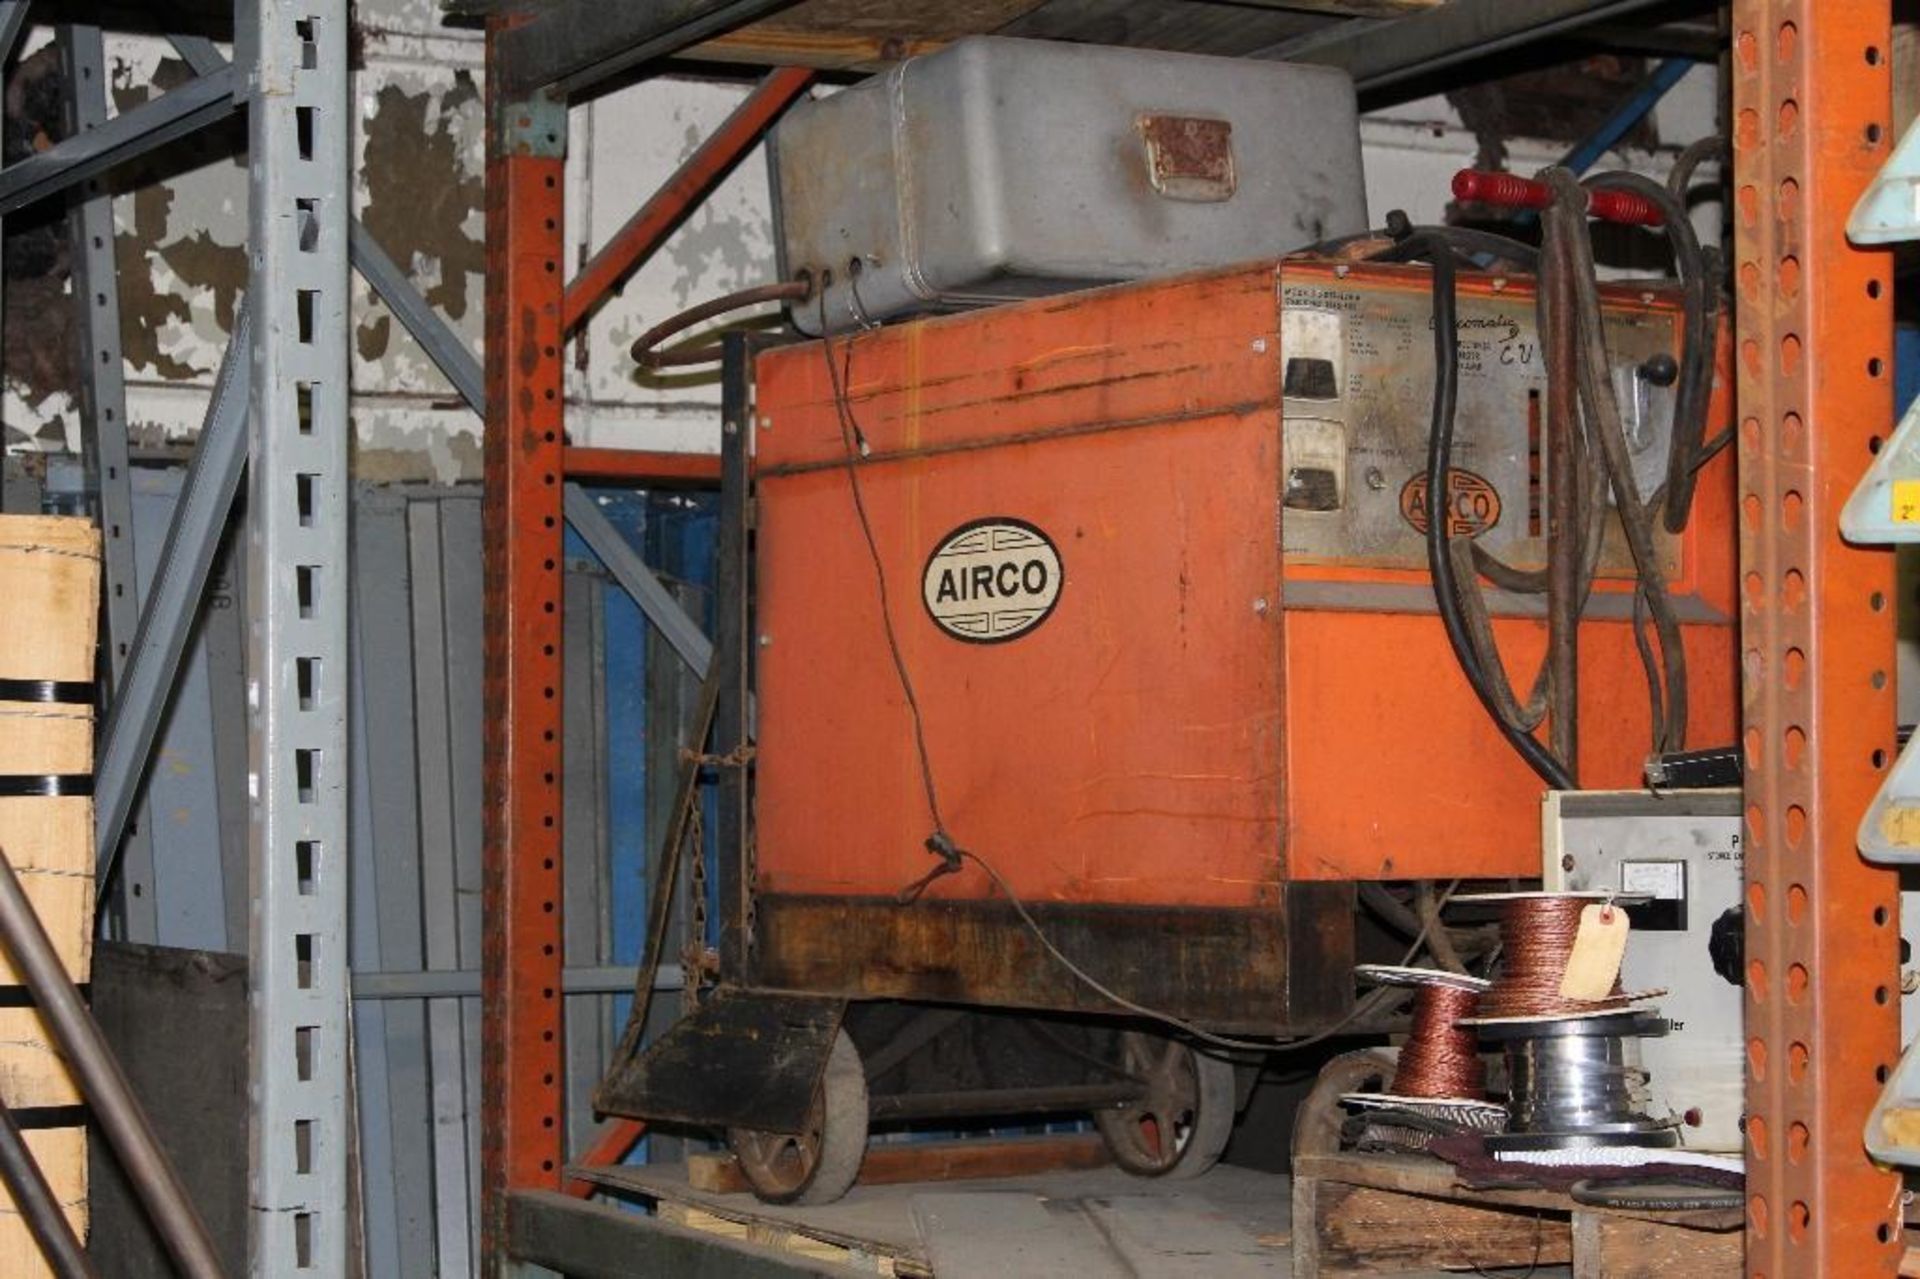 Airco Welding Unit with wheels